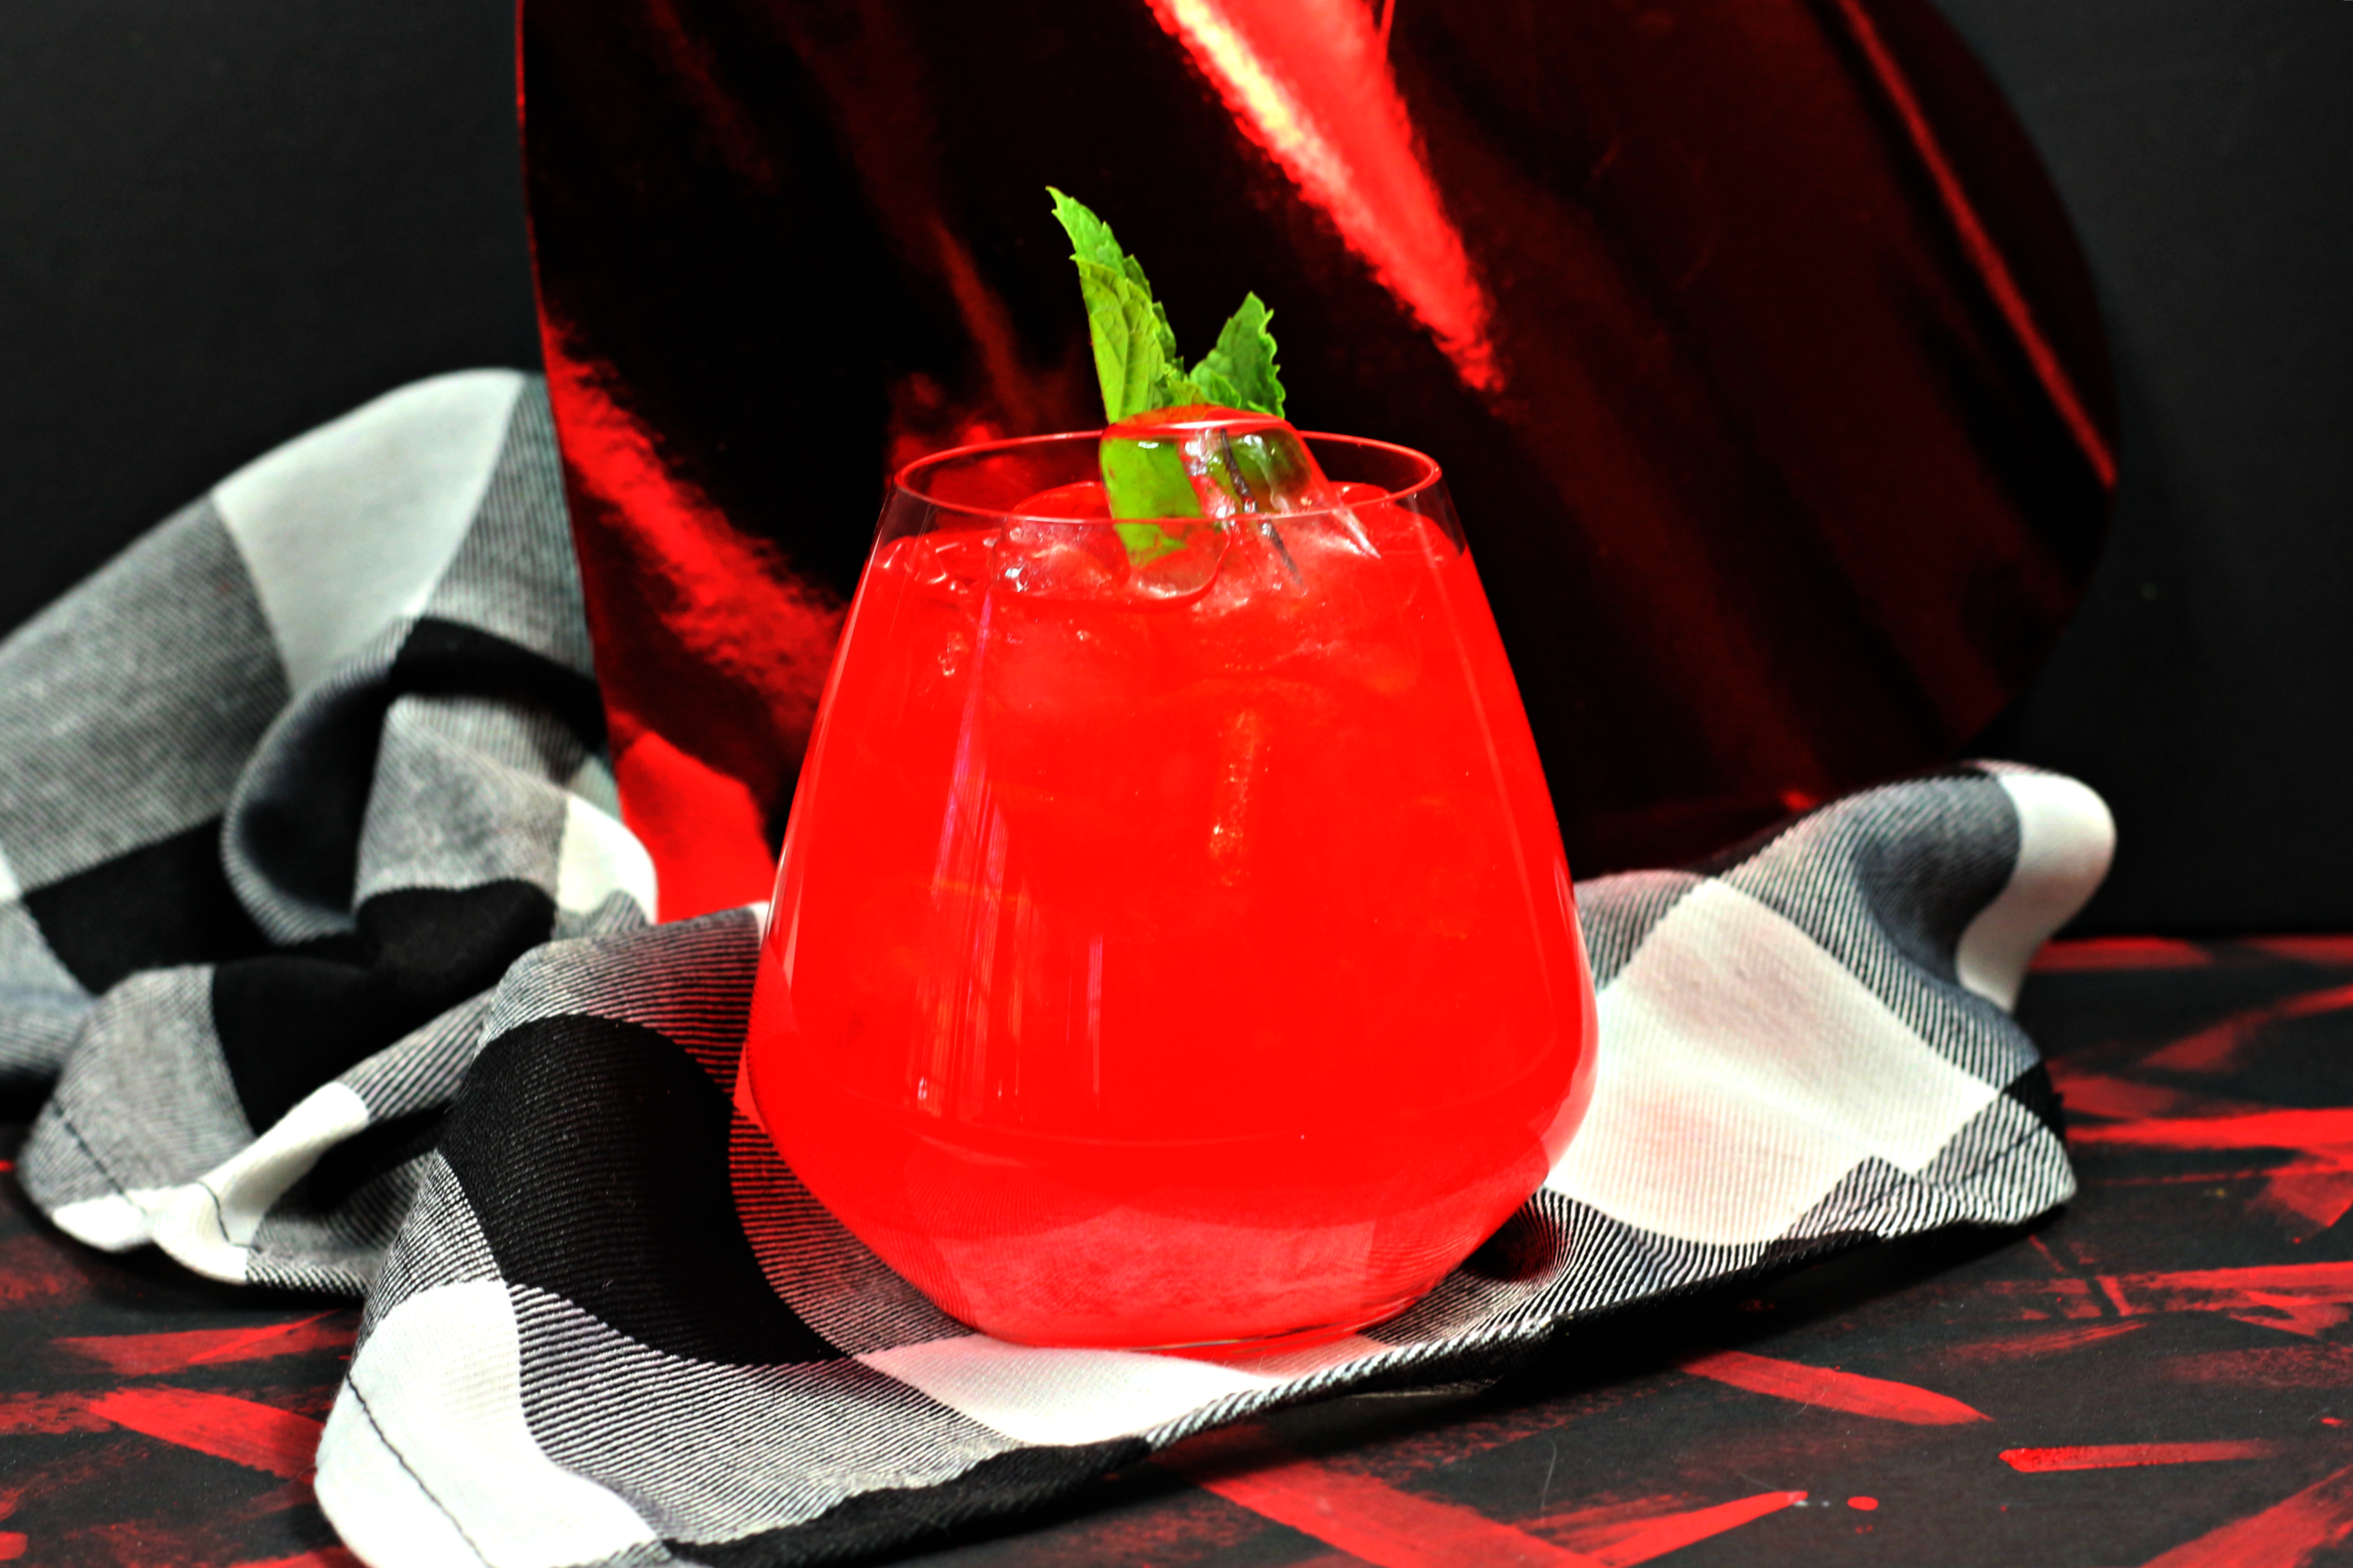 Queen of Hearts cocktail